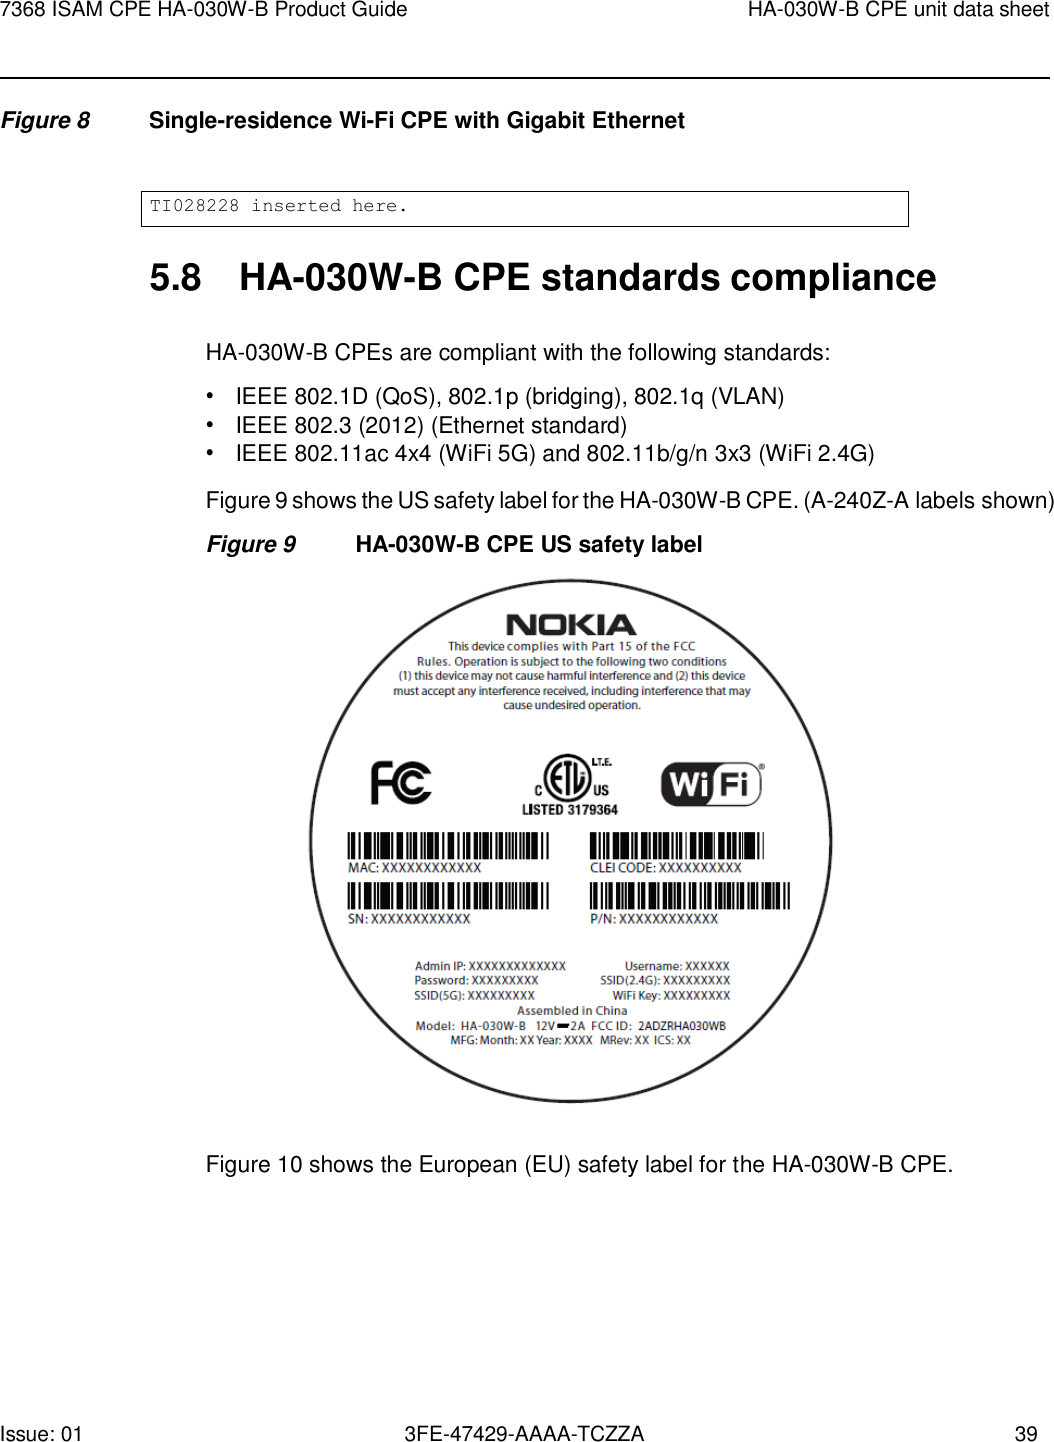 Page 39 of Nokia Bell HA030WB 7368 Intelligent Services Access Manager CPE User Manual 7368 ISAM CPE HA 020W A Product Guide